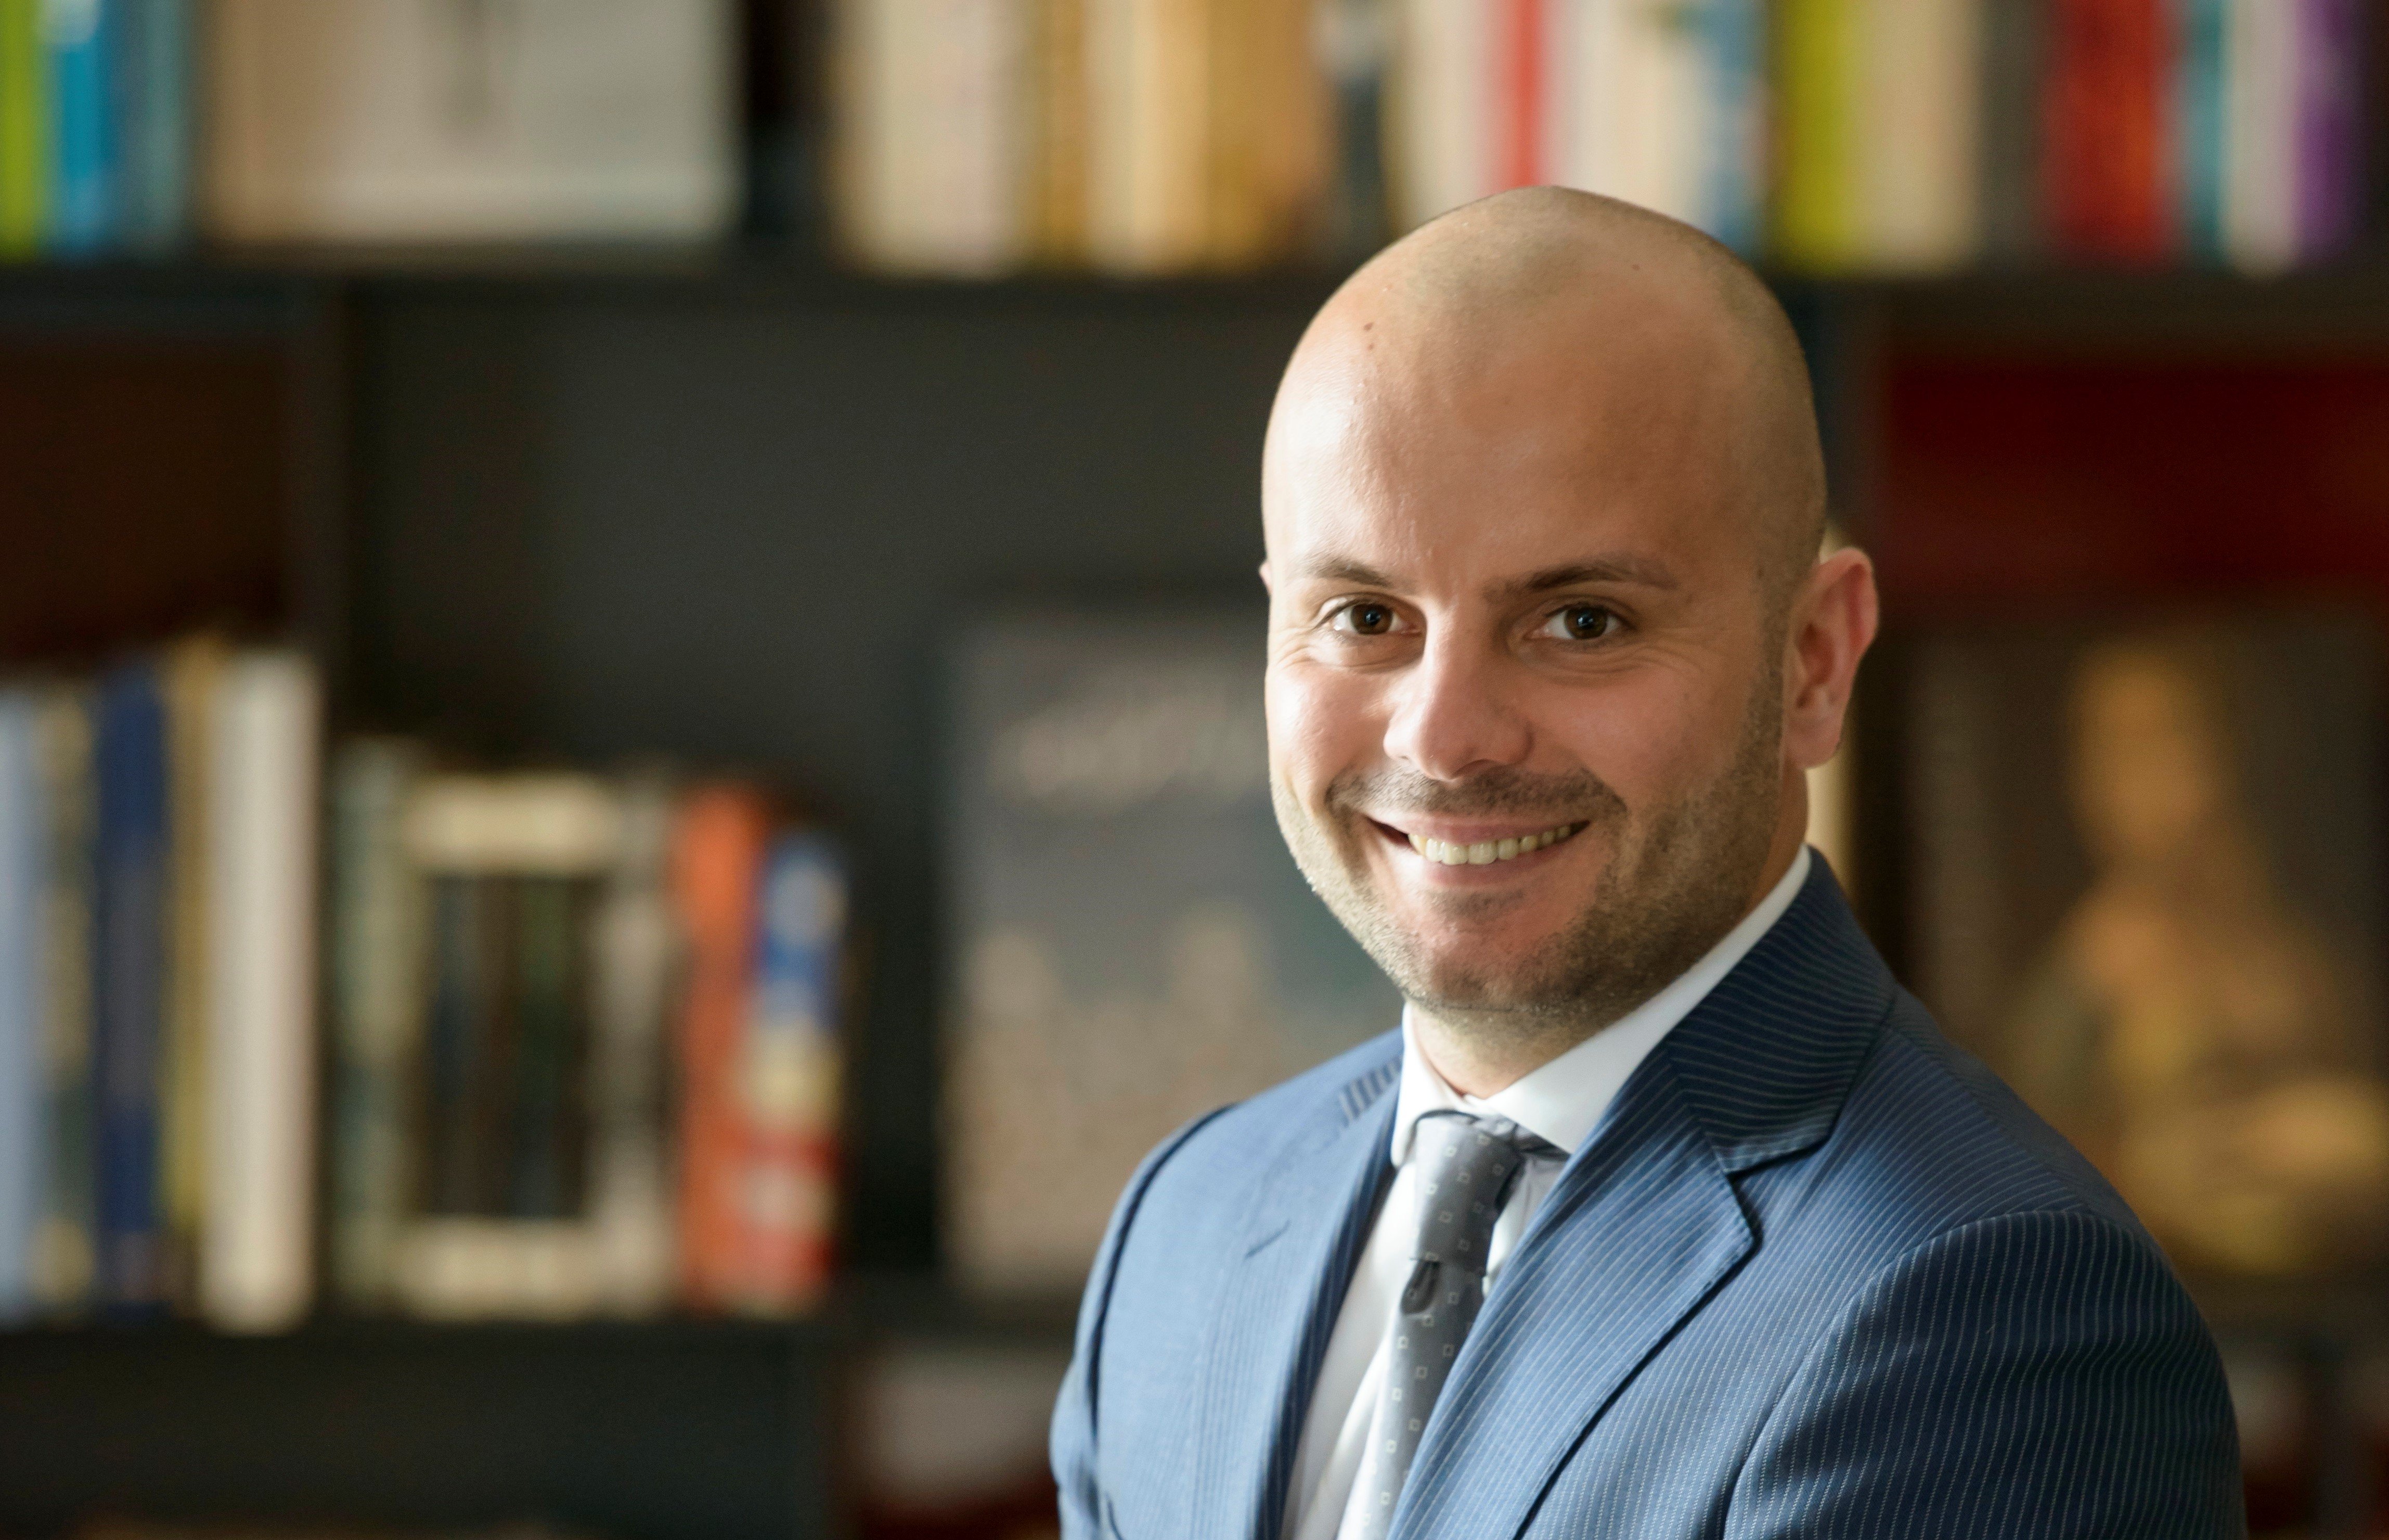 Alumni Story Gianluca Ingrassia: As a sales director, I put all my energy into proactive sales